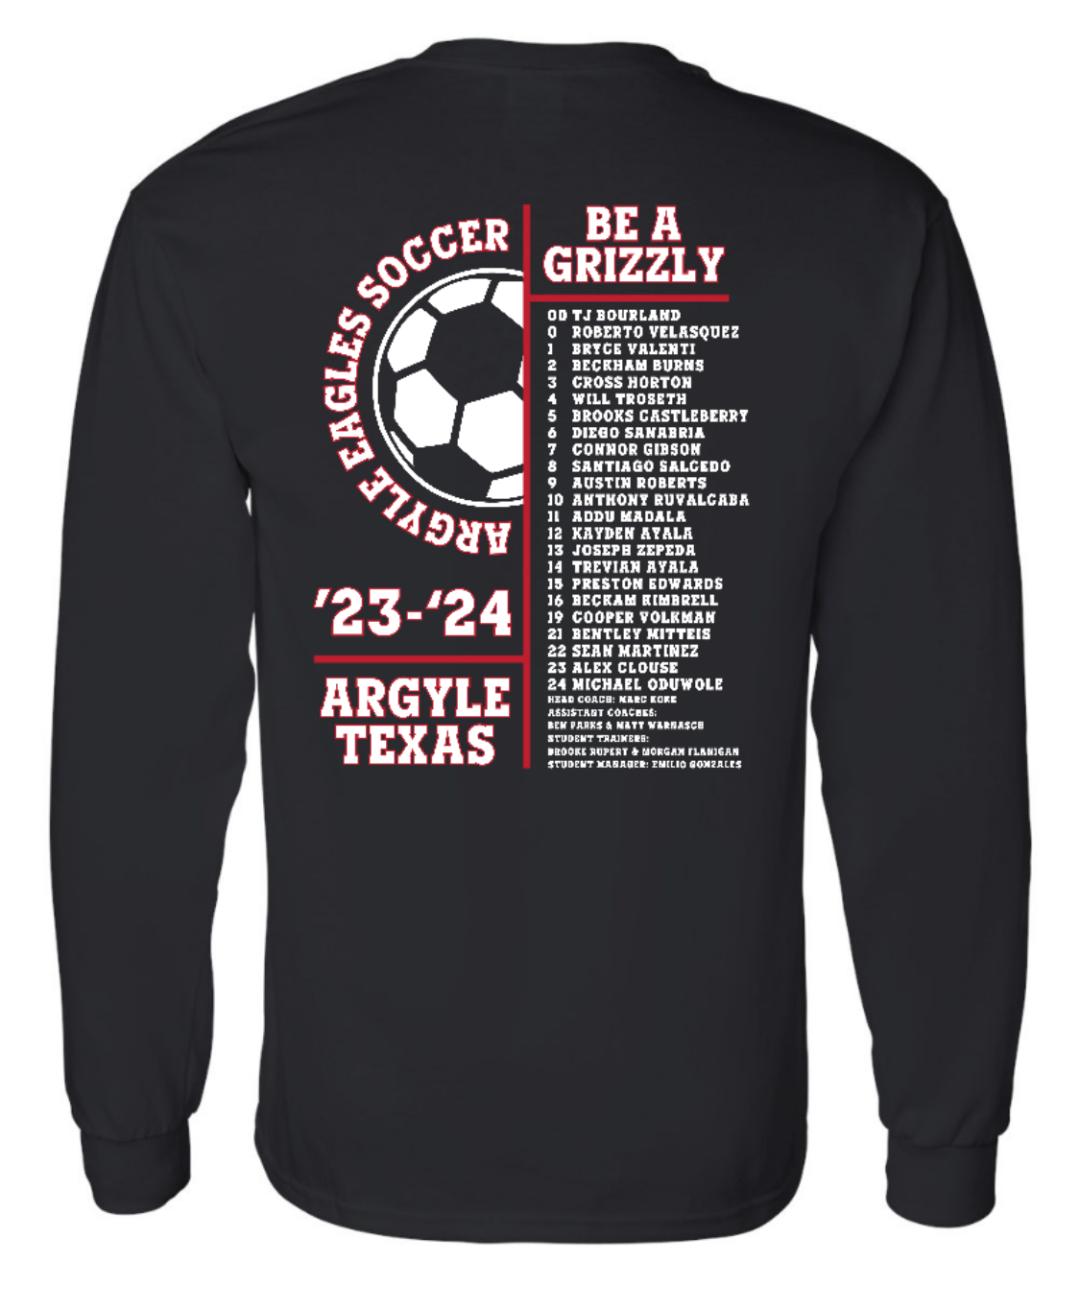 FINAL FEW - 2023 Boys Soccer Be a Grizzly Cotton Long Sleeve - Black